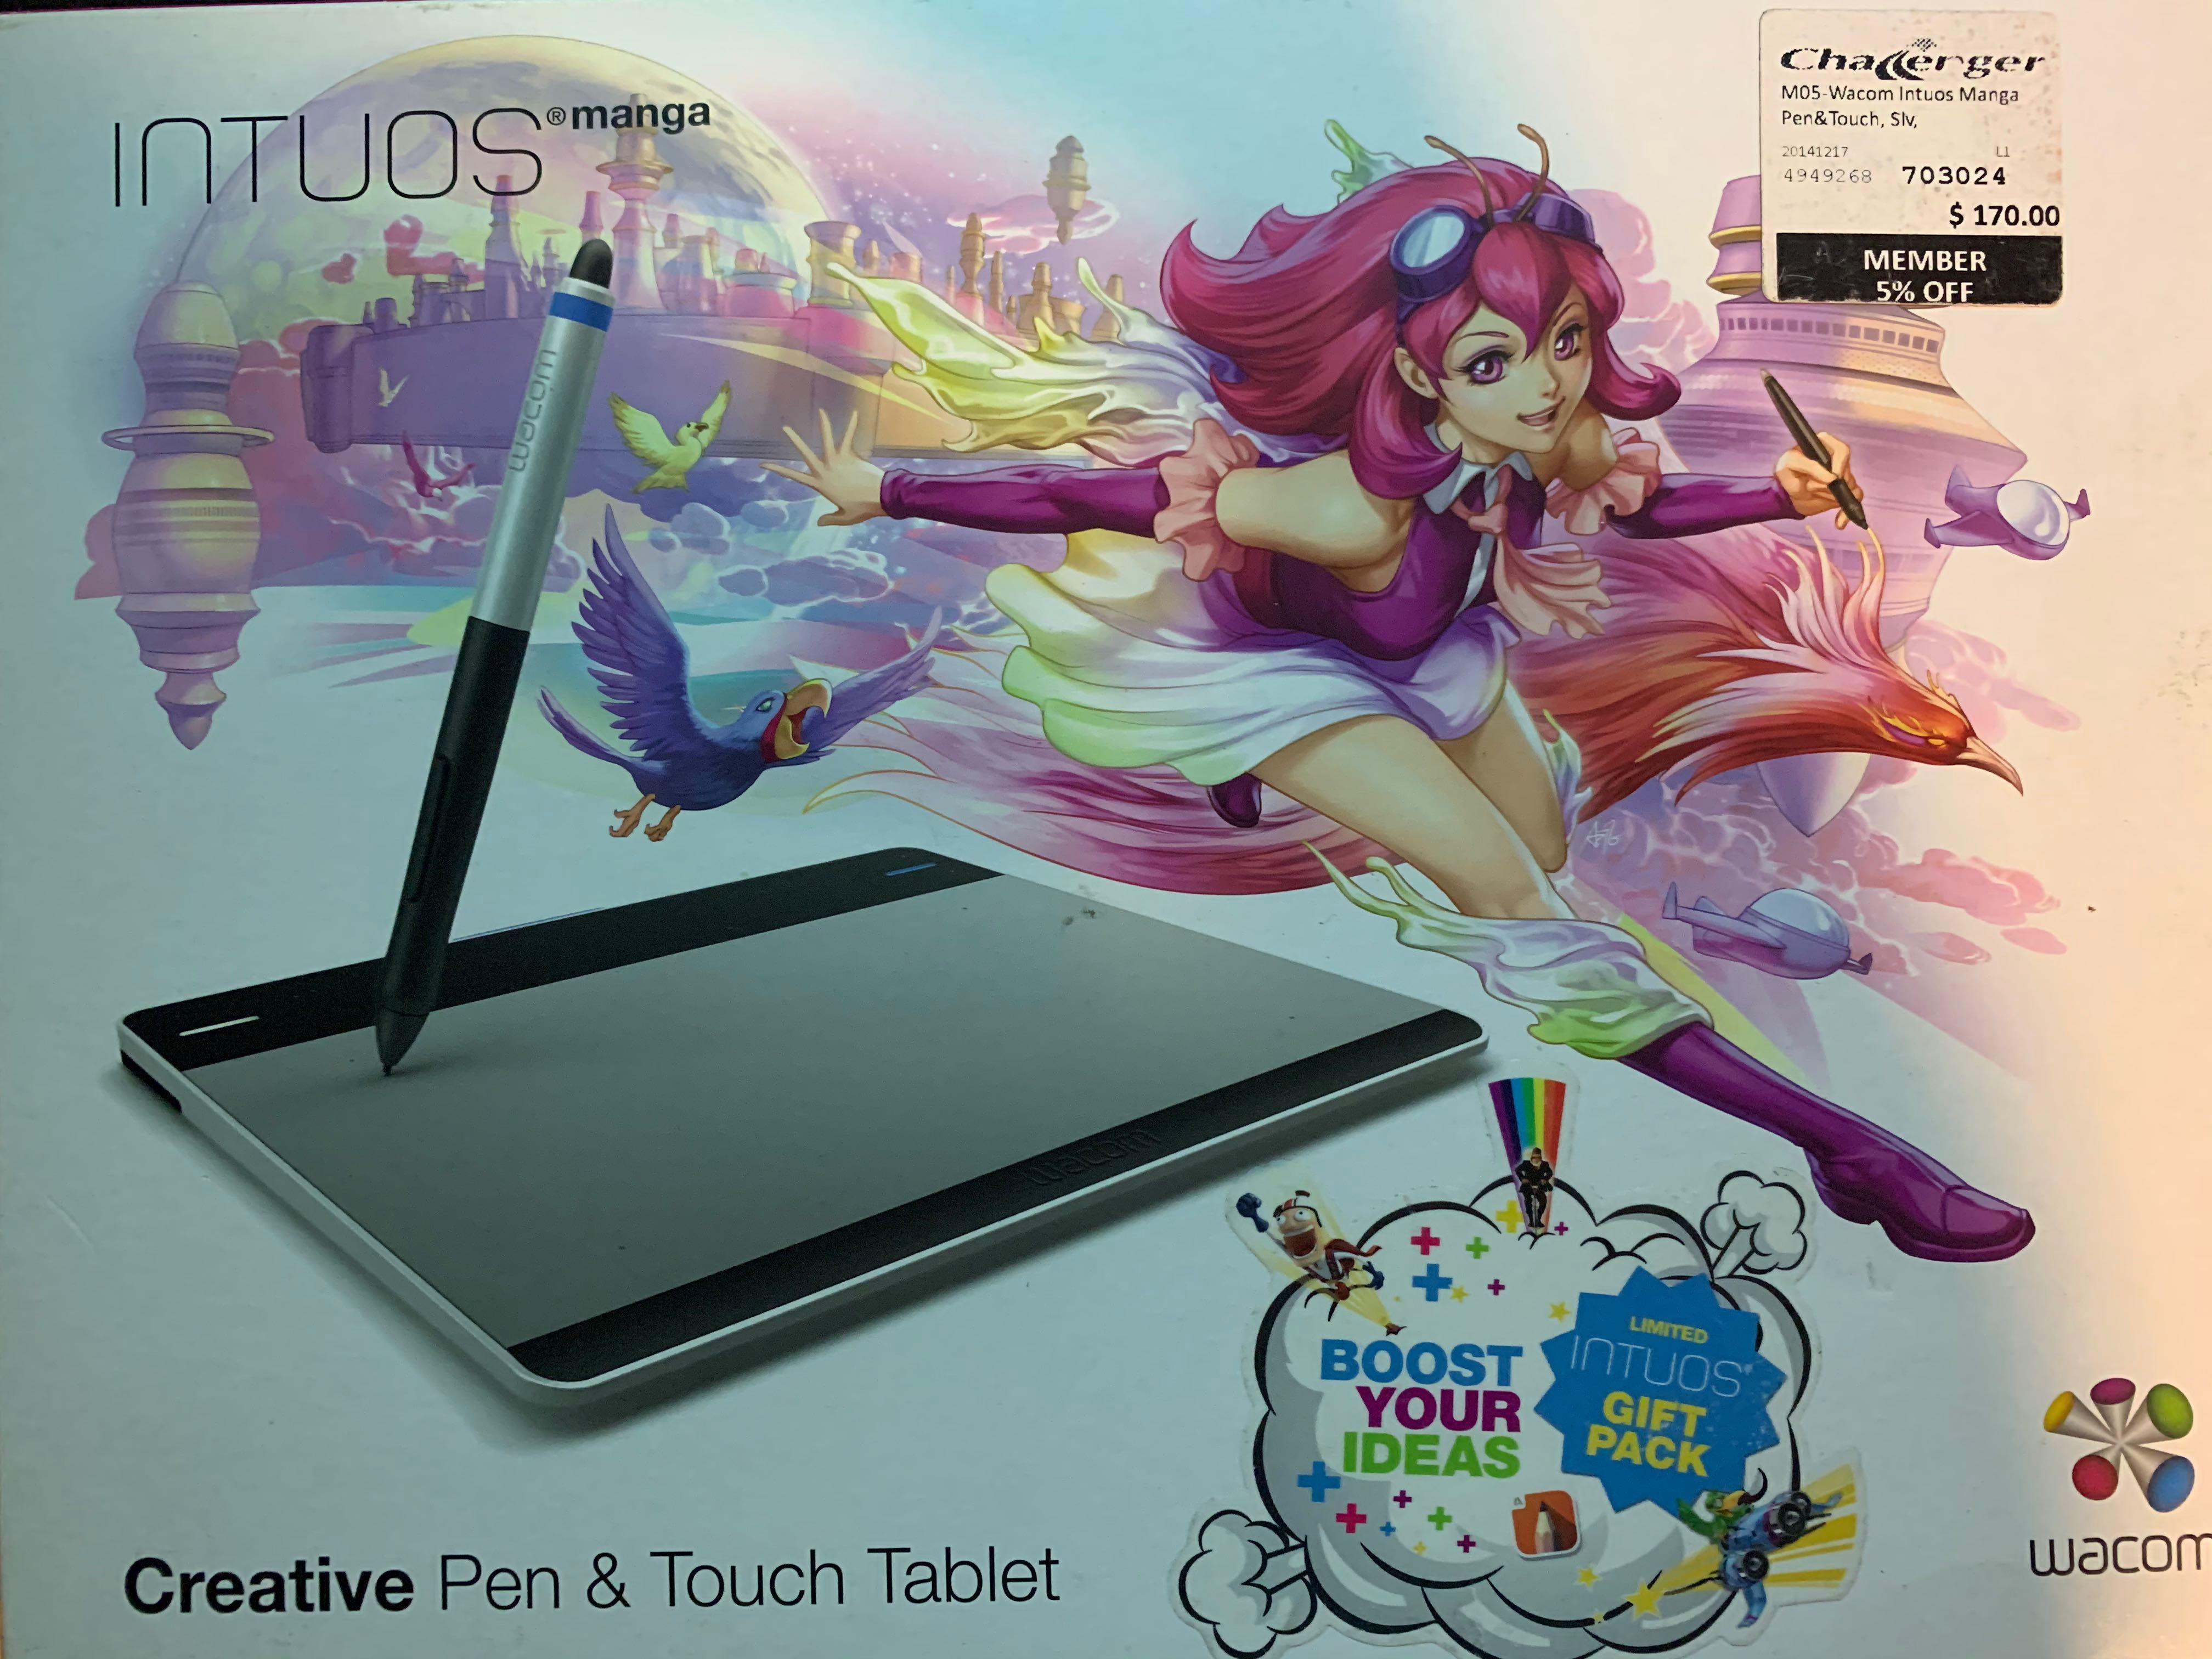 Intuos Manga Cth 480 S1 C Mobile Phones Gadgets E Readers On Carousell